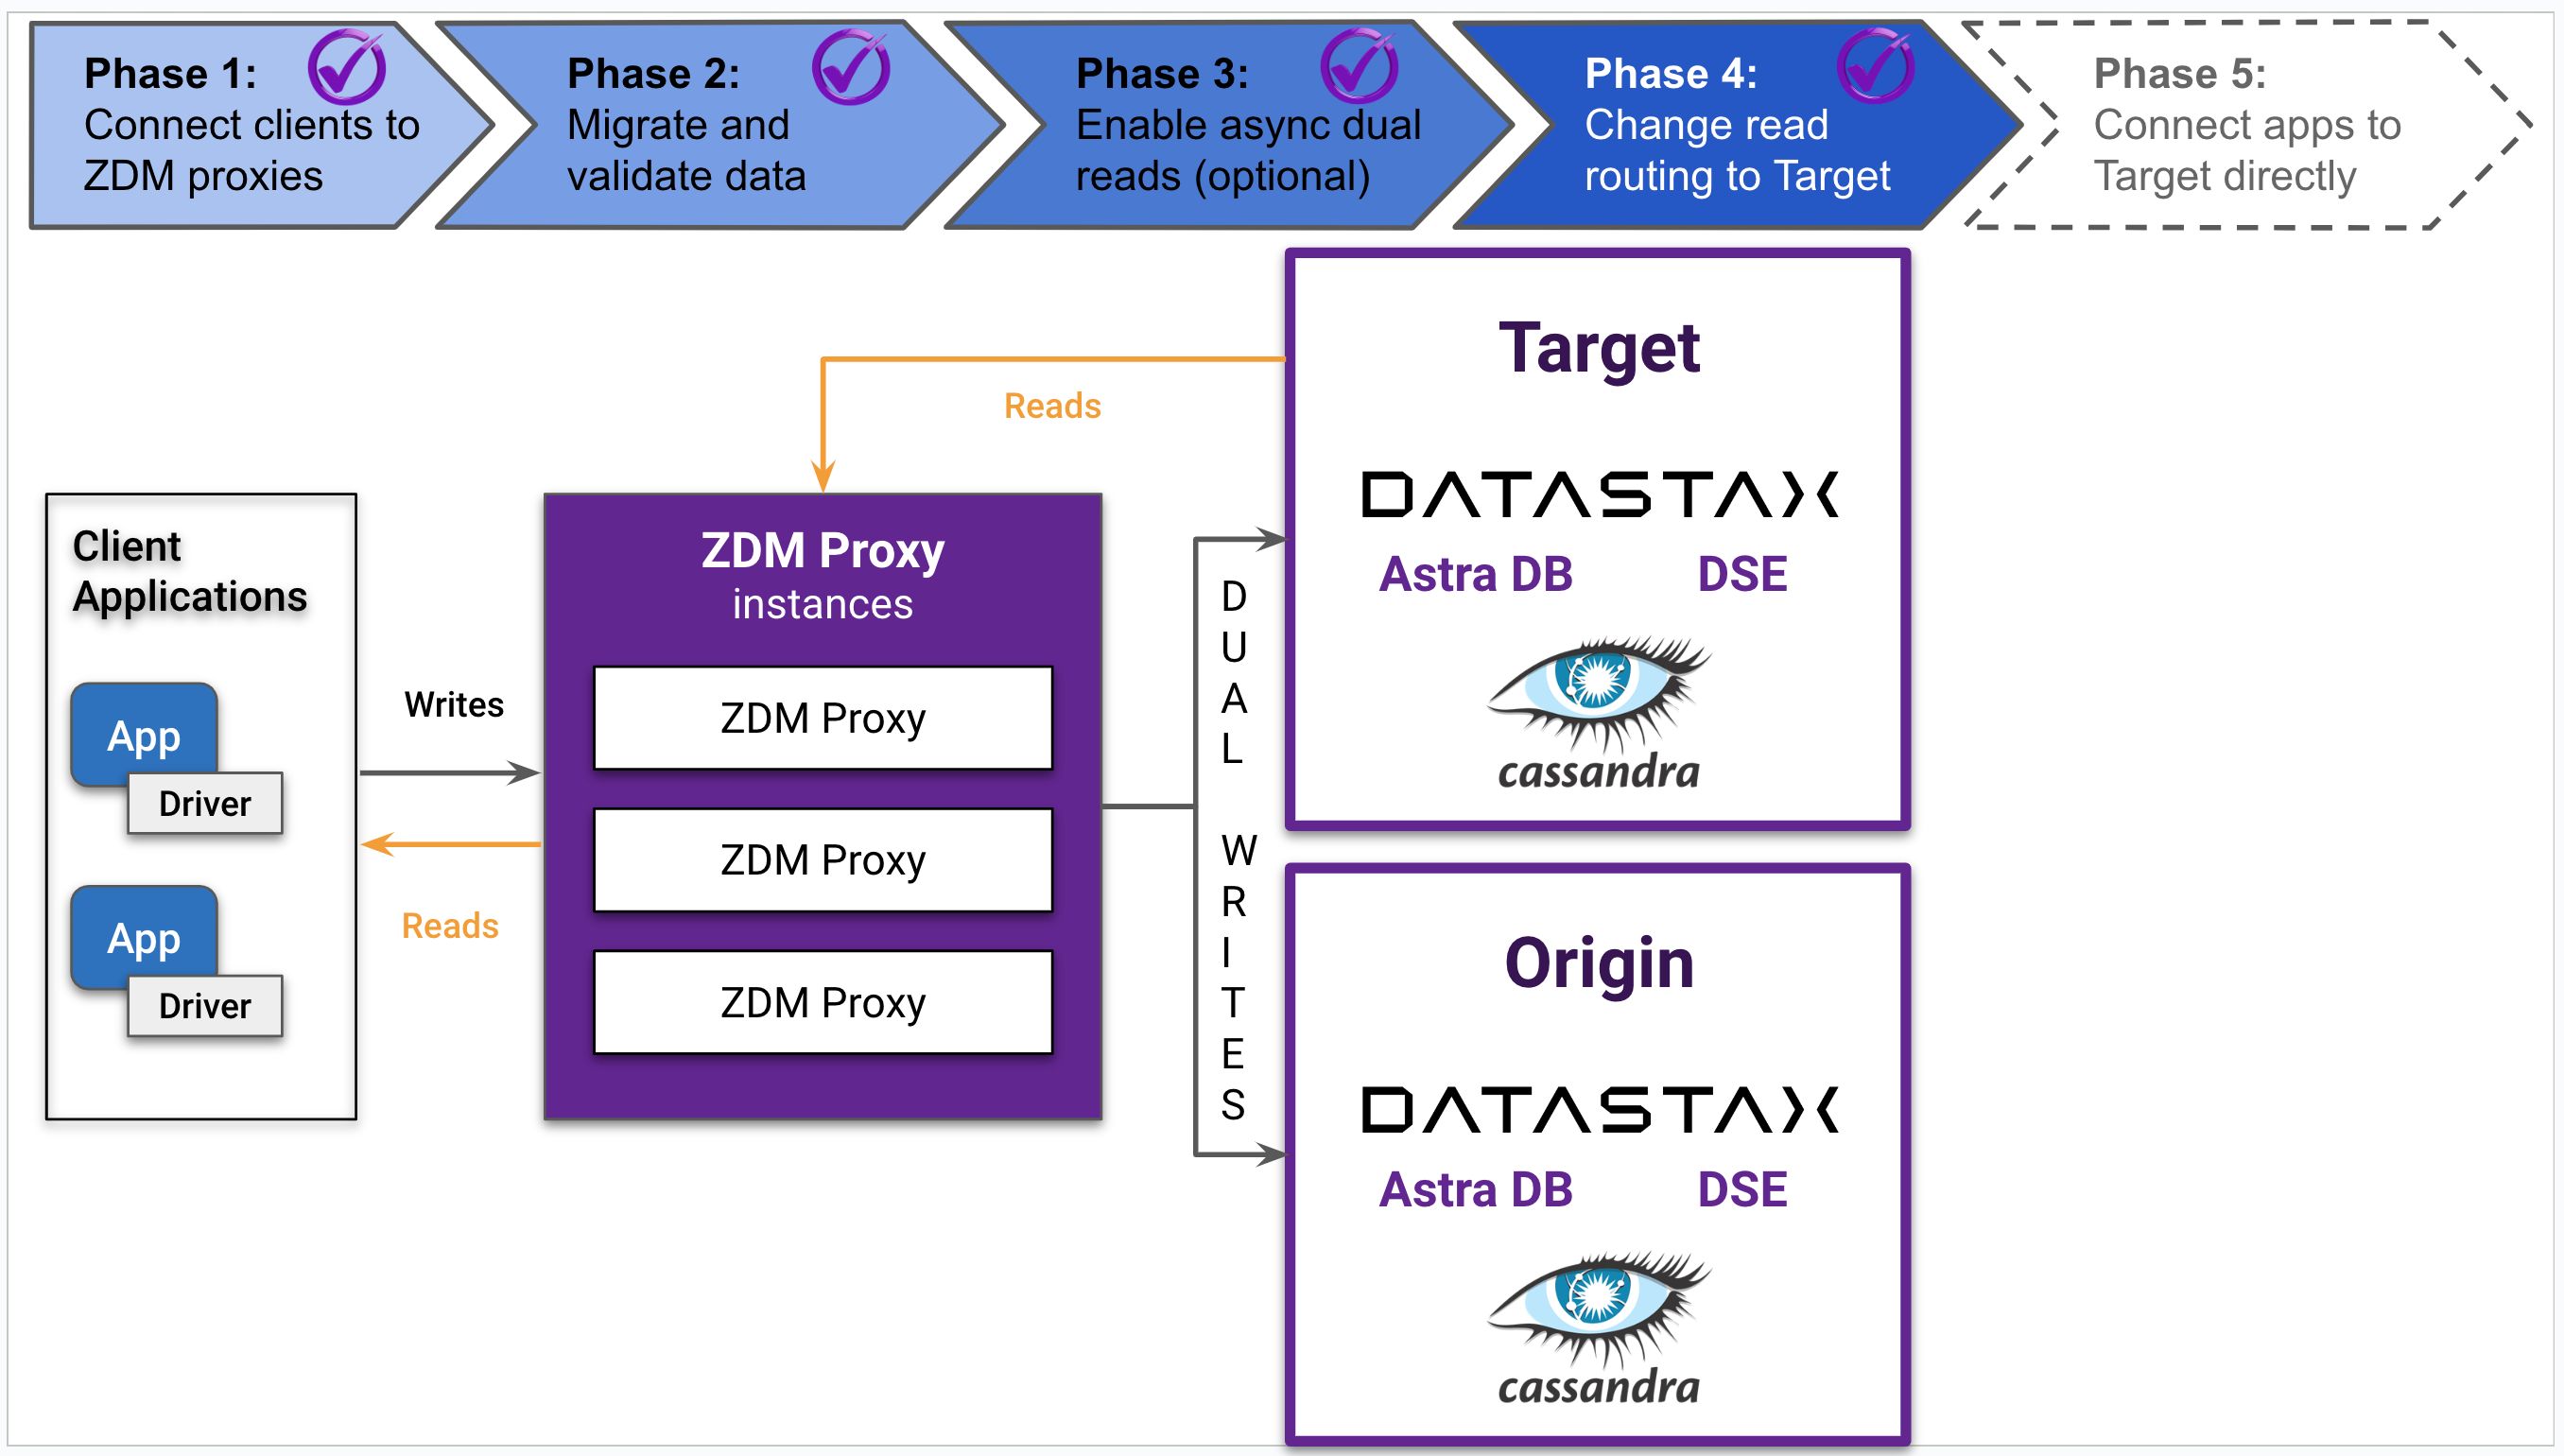 Phase 4 diagram shows read routing on ZDM Proxy was switched to Target.